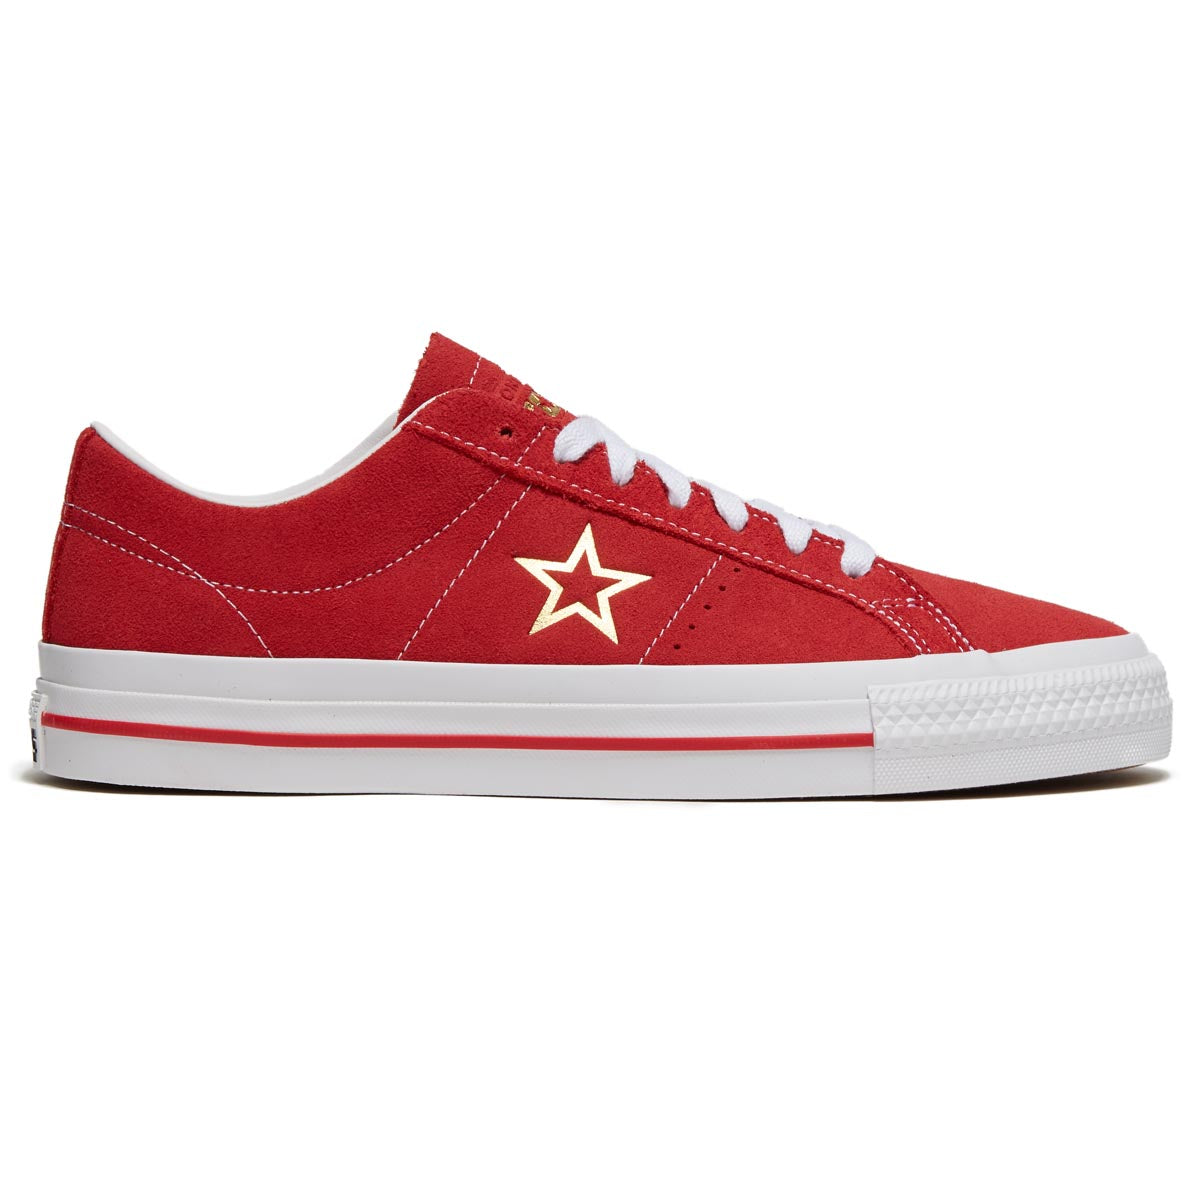 Converse One Star Pro Suede Ox Shoes - Varsity Red/White/Gold – CCS